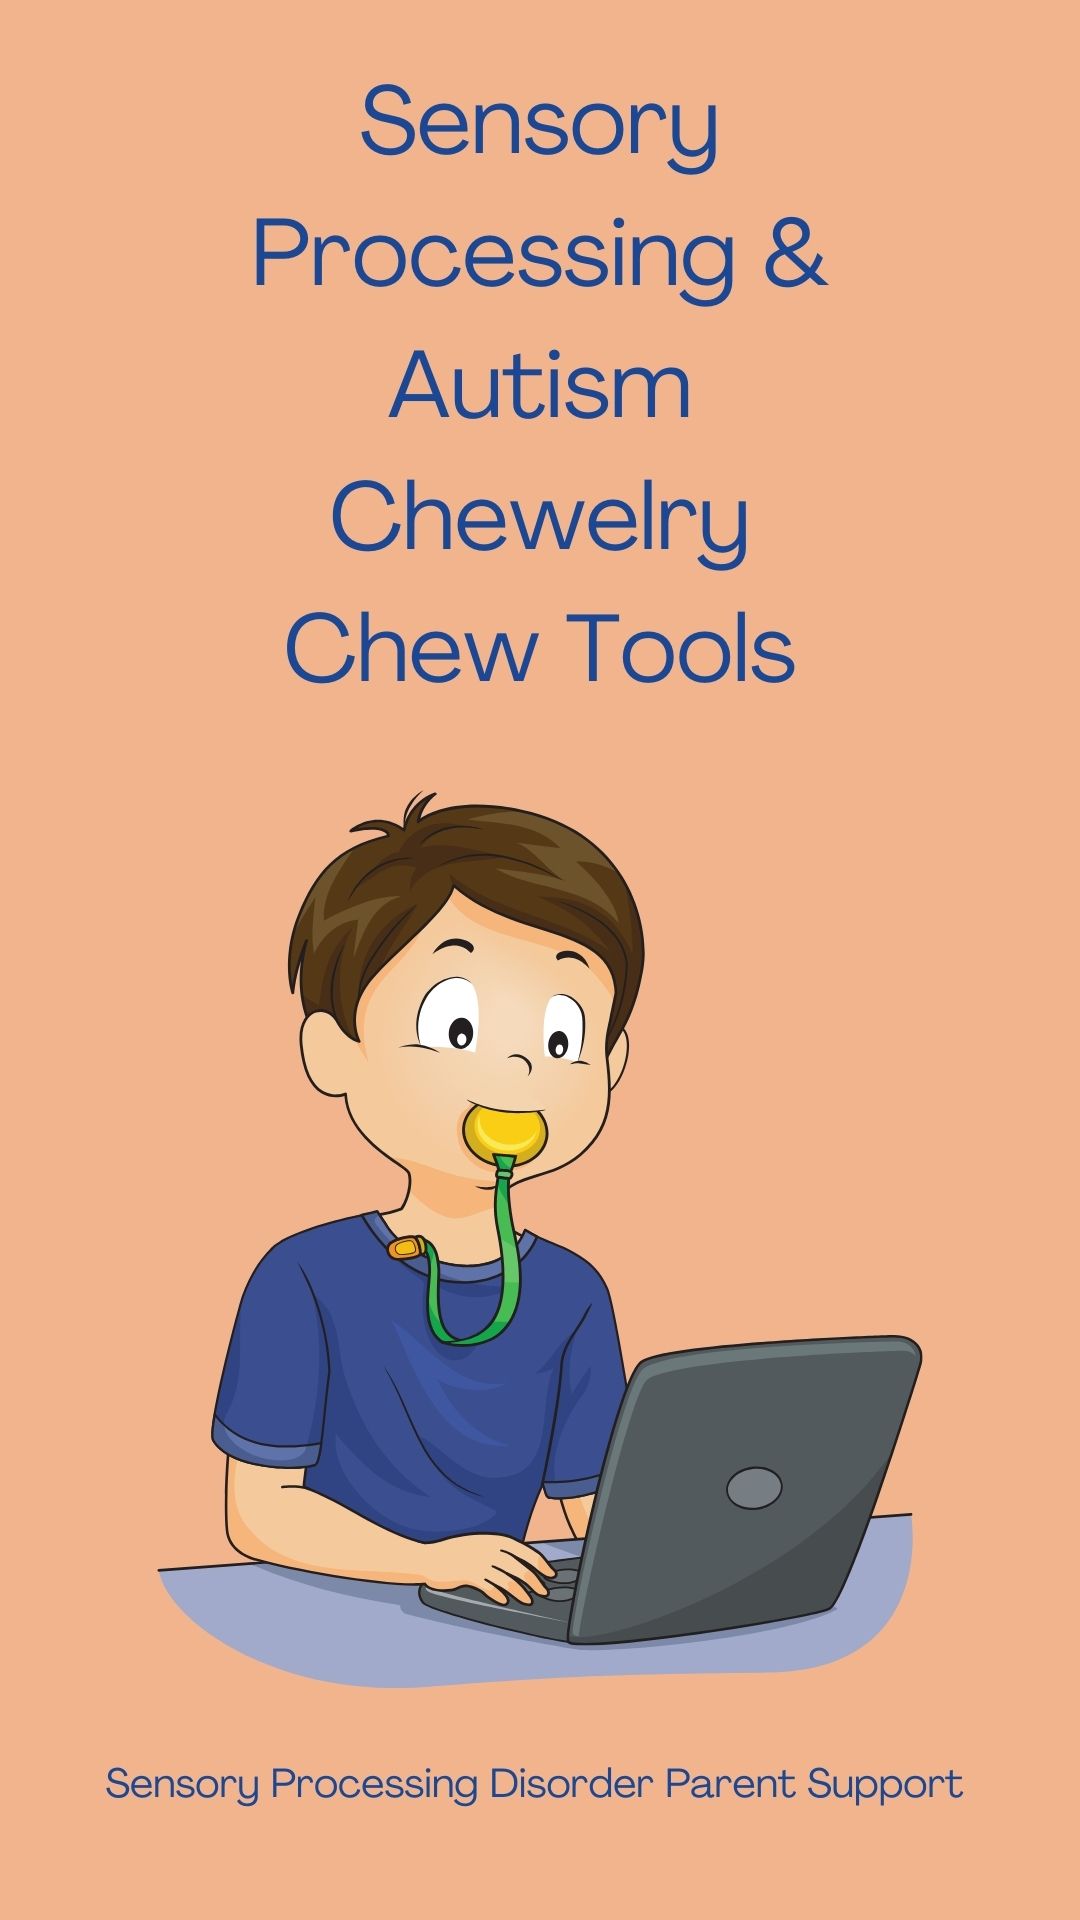 Sensory Processing & Autism Chewelry Chew Tools